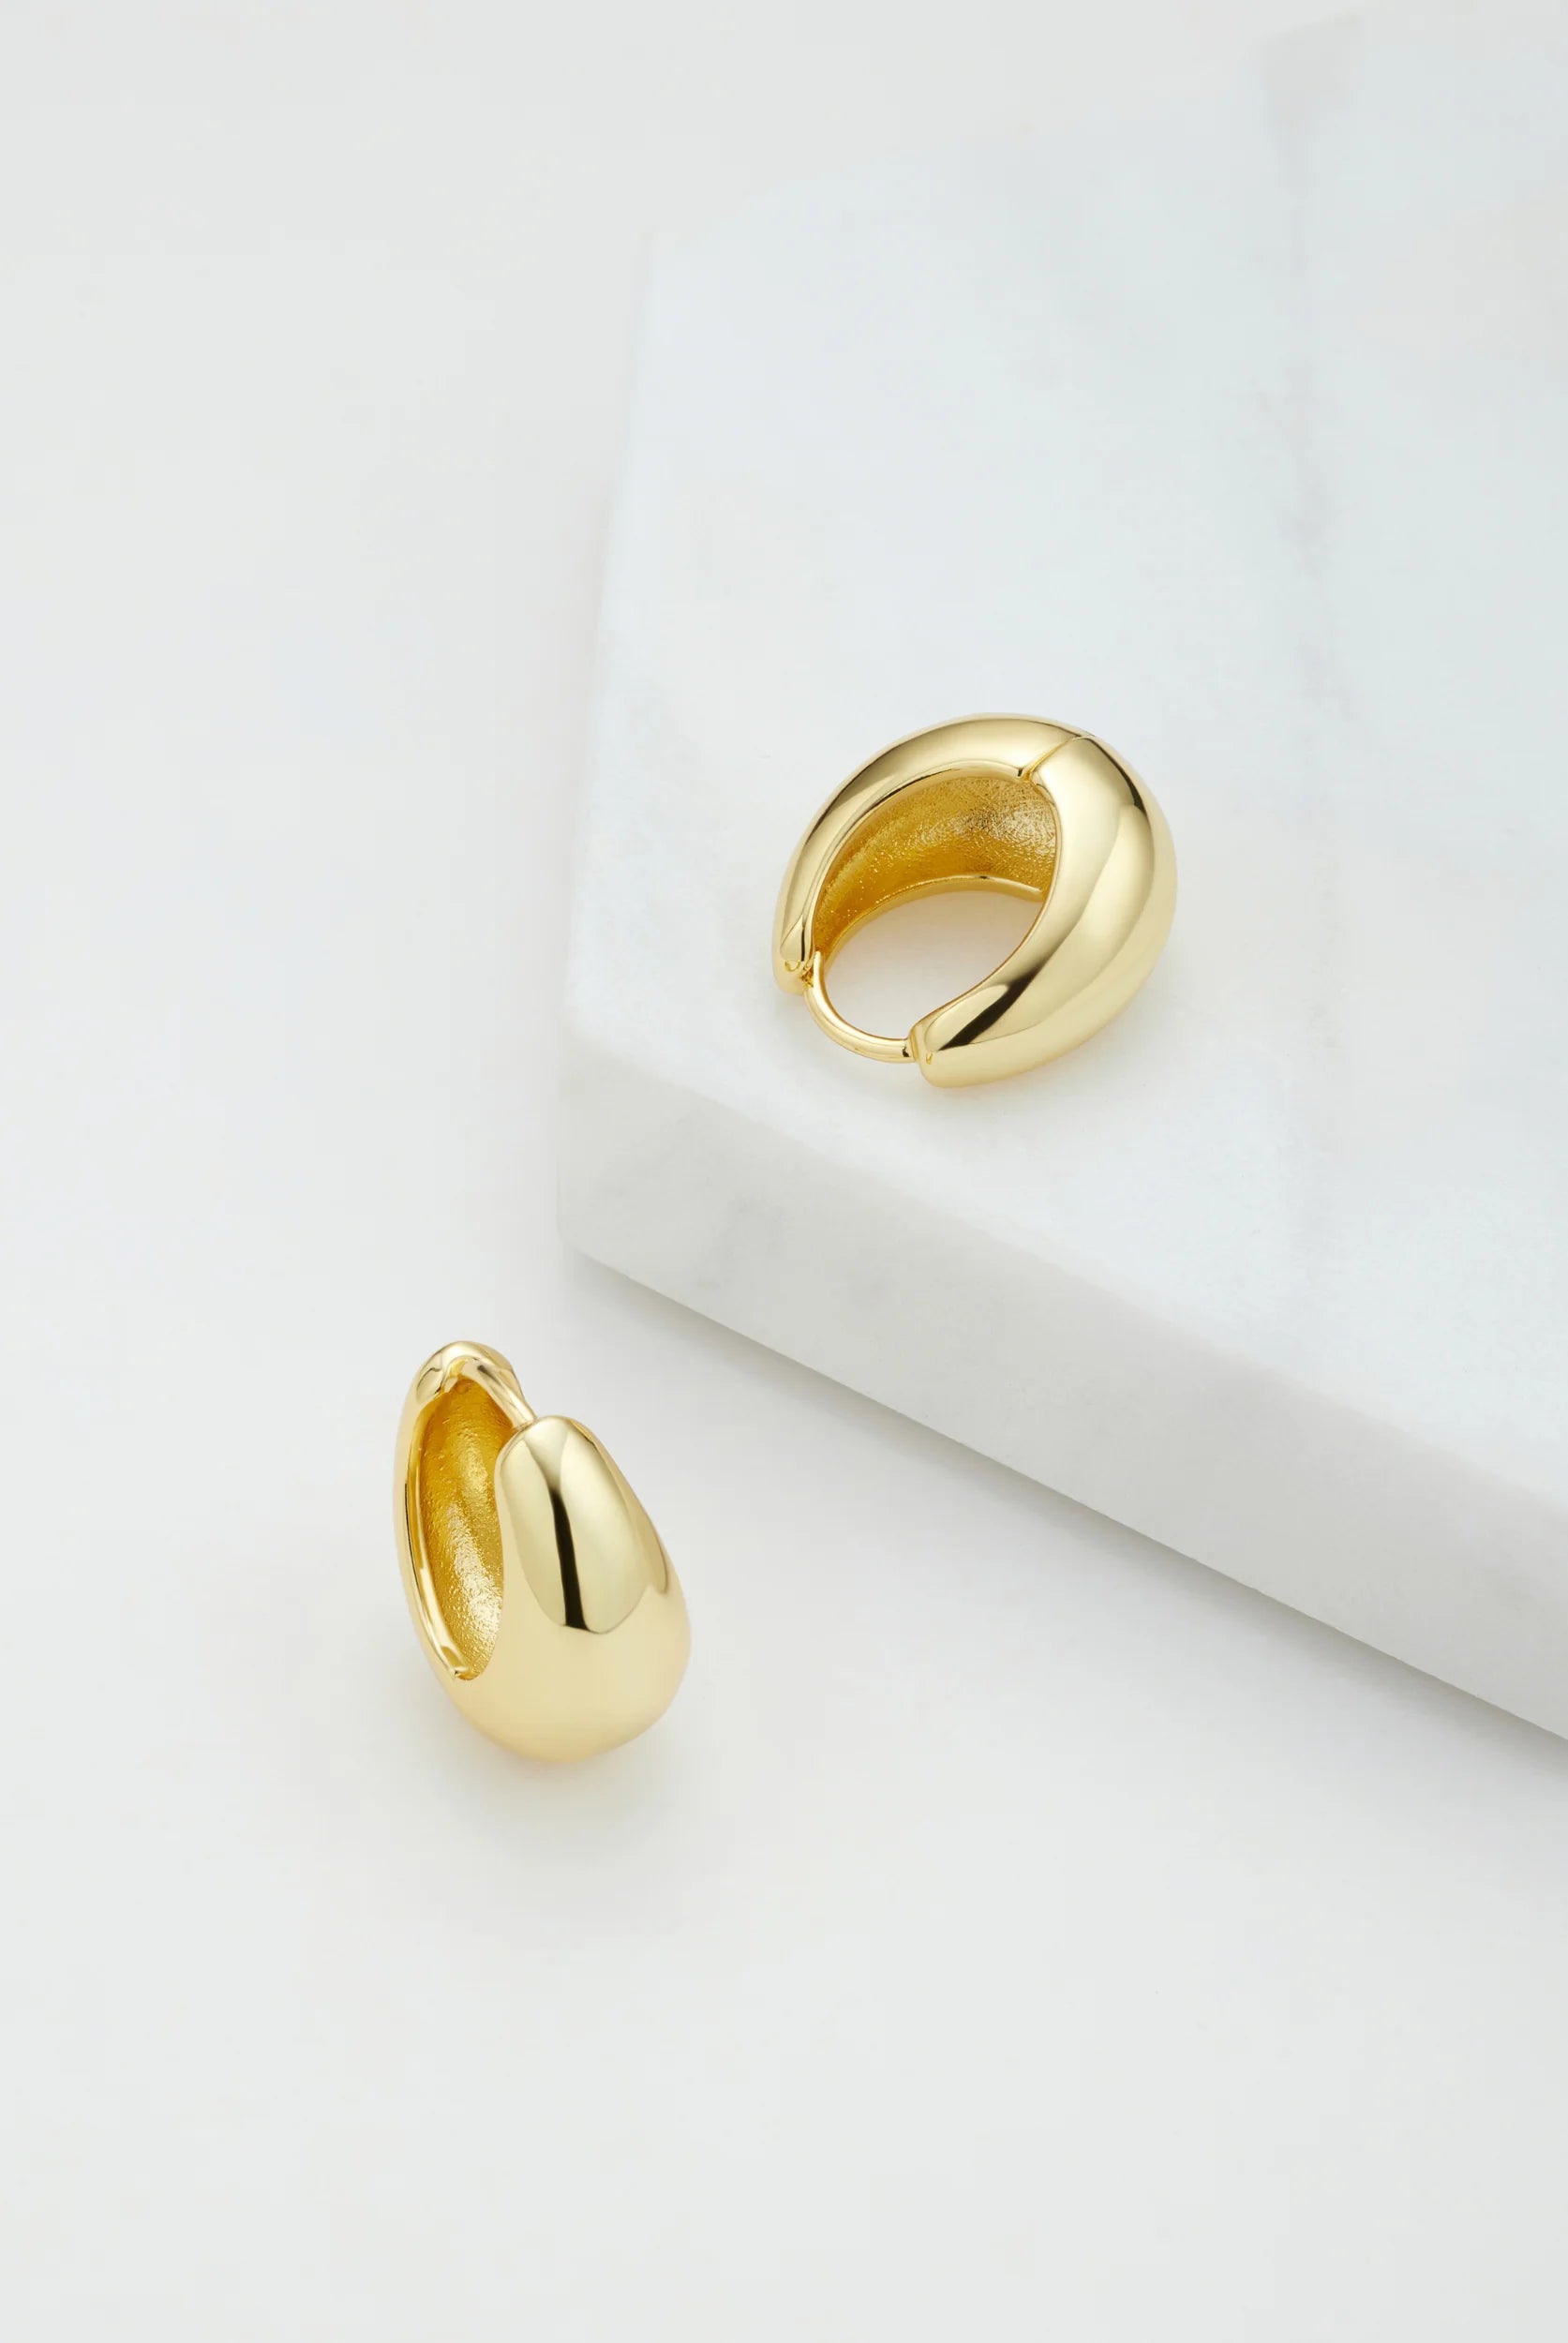 Zafino Gold Steph Earrings (small, medium and large)